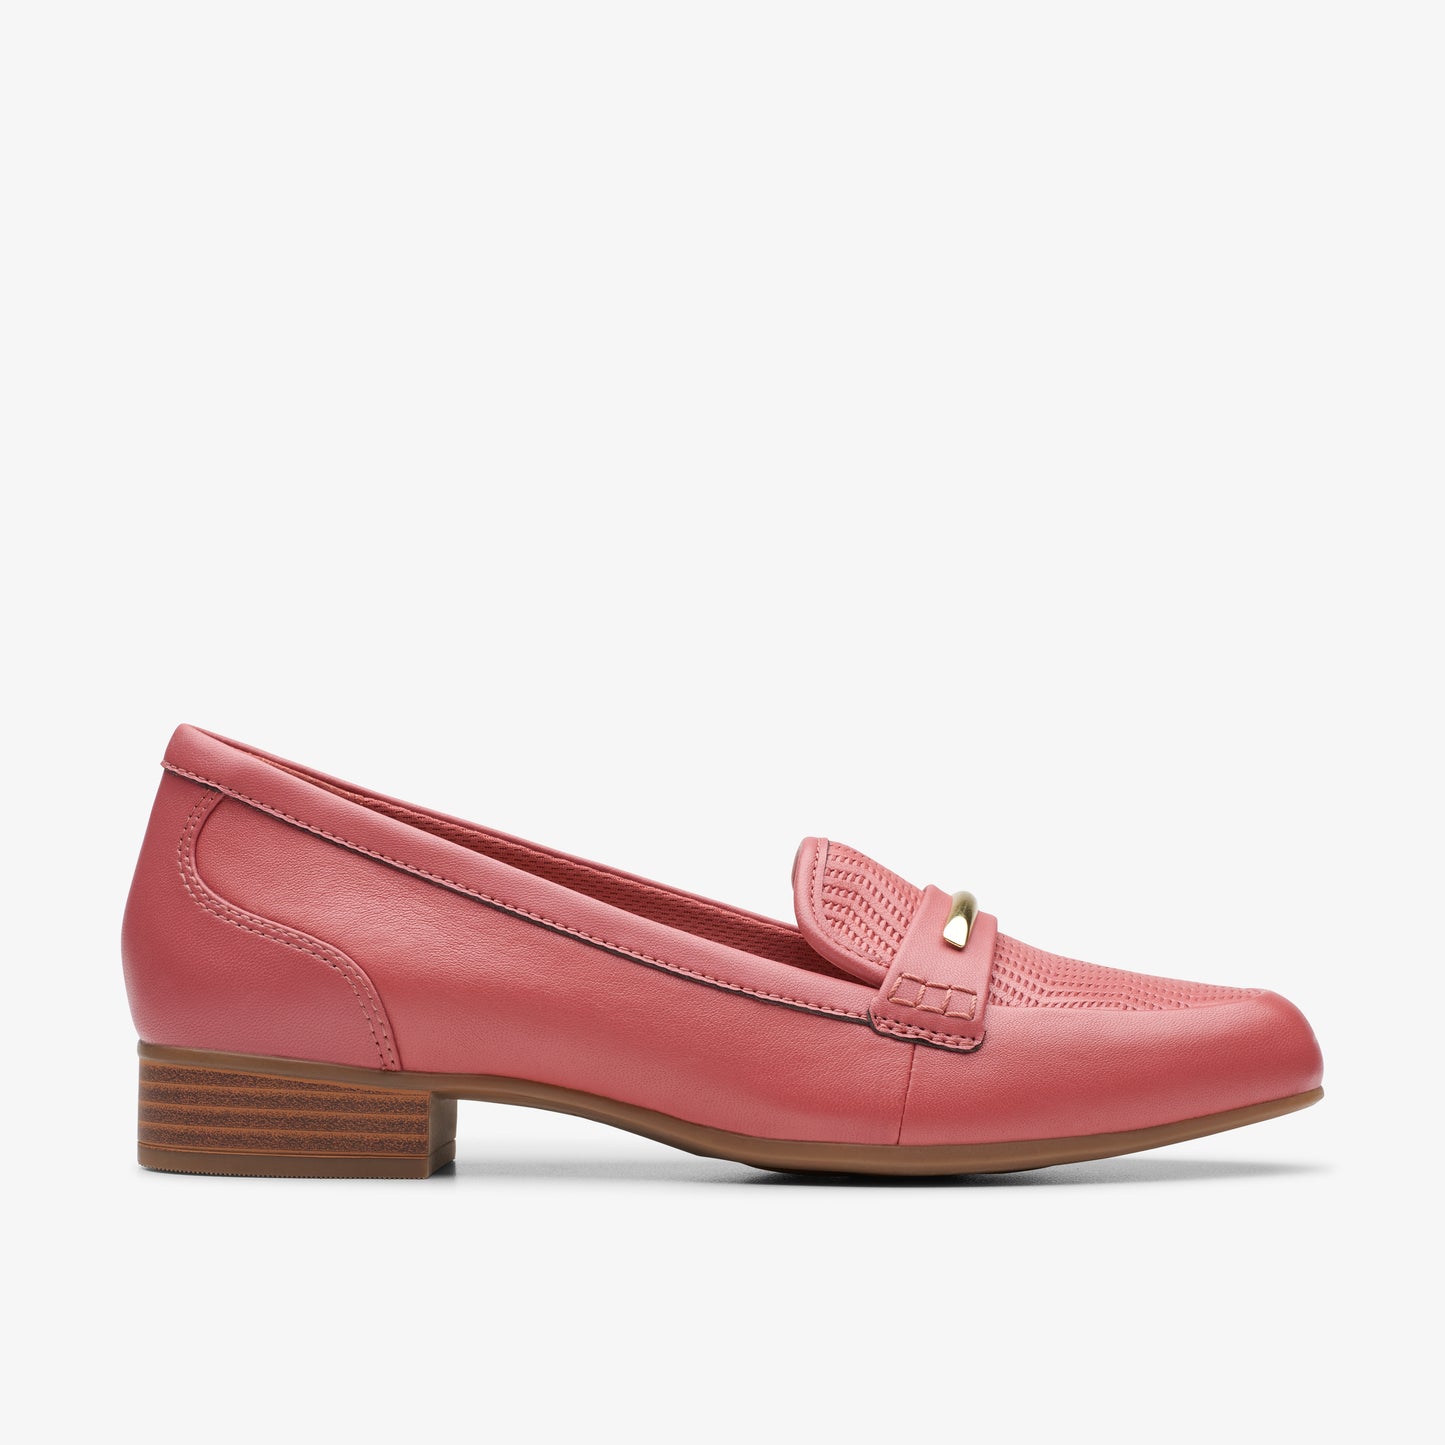 Juliet Aster Dusty Rose Leather